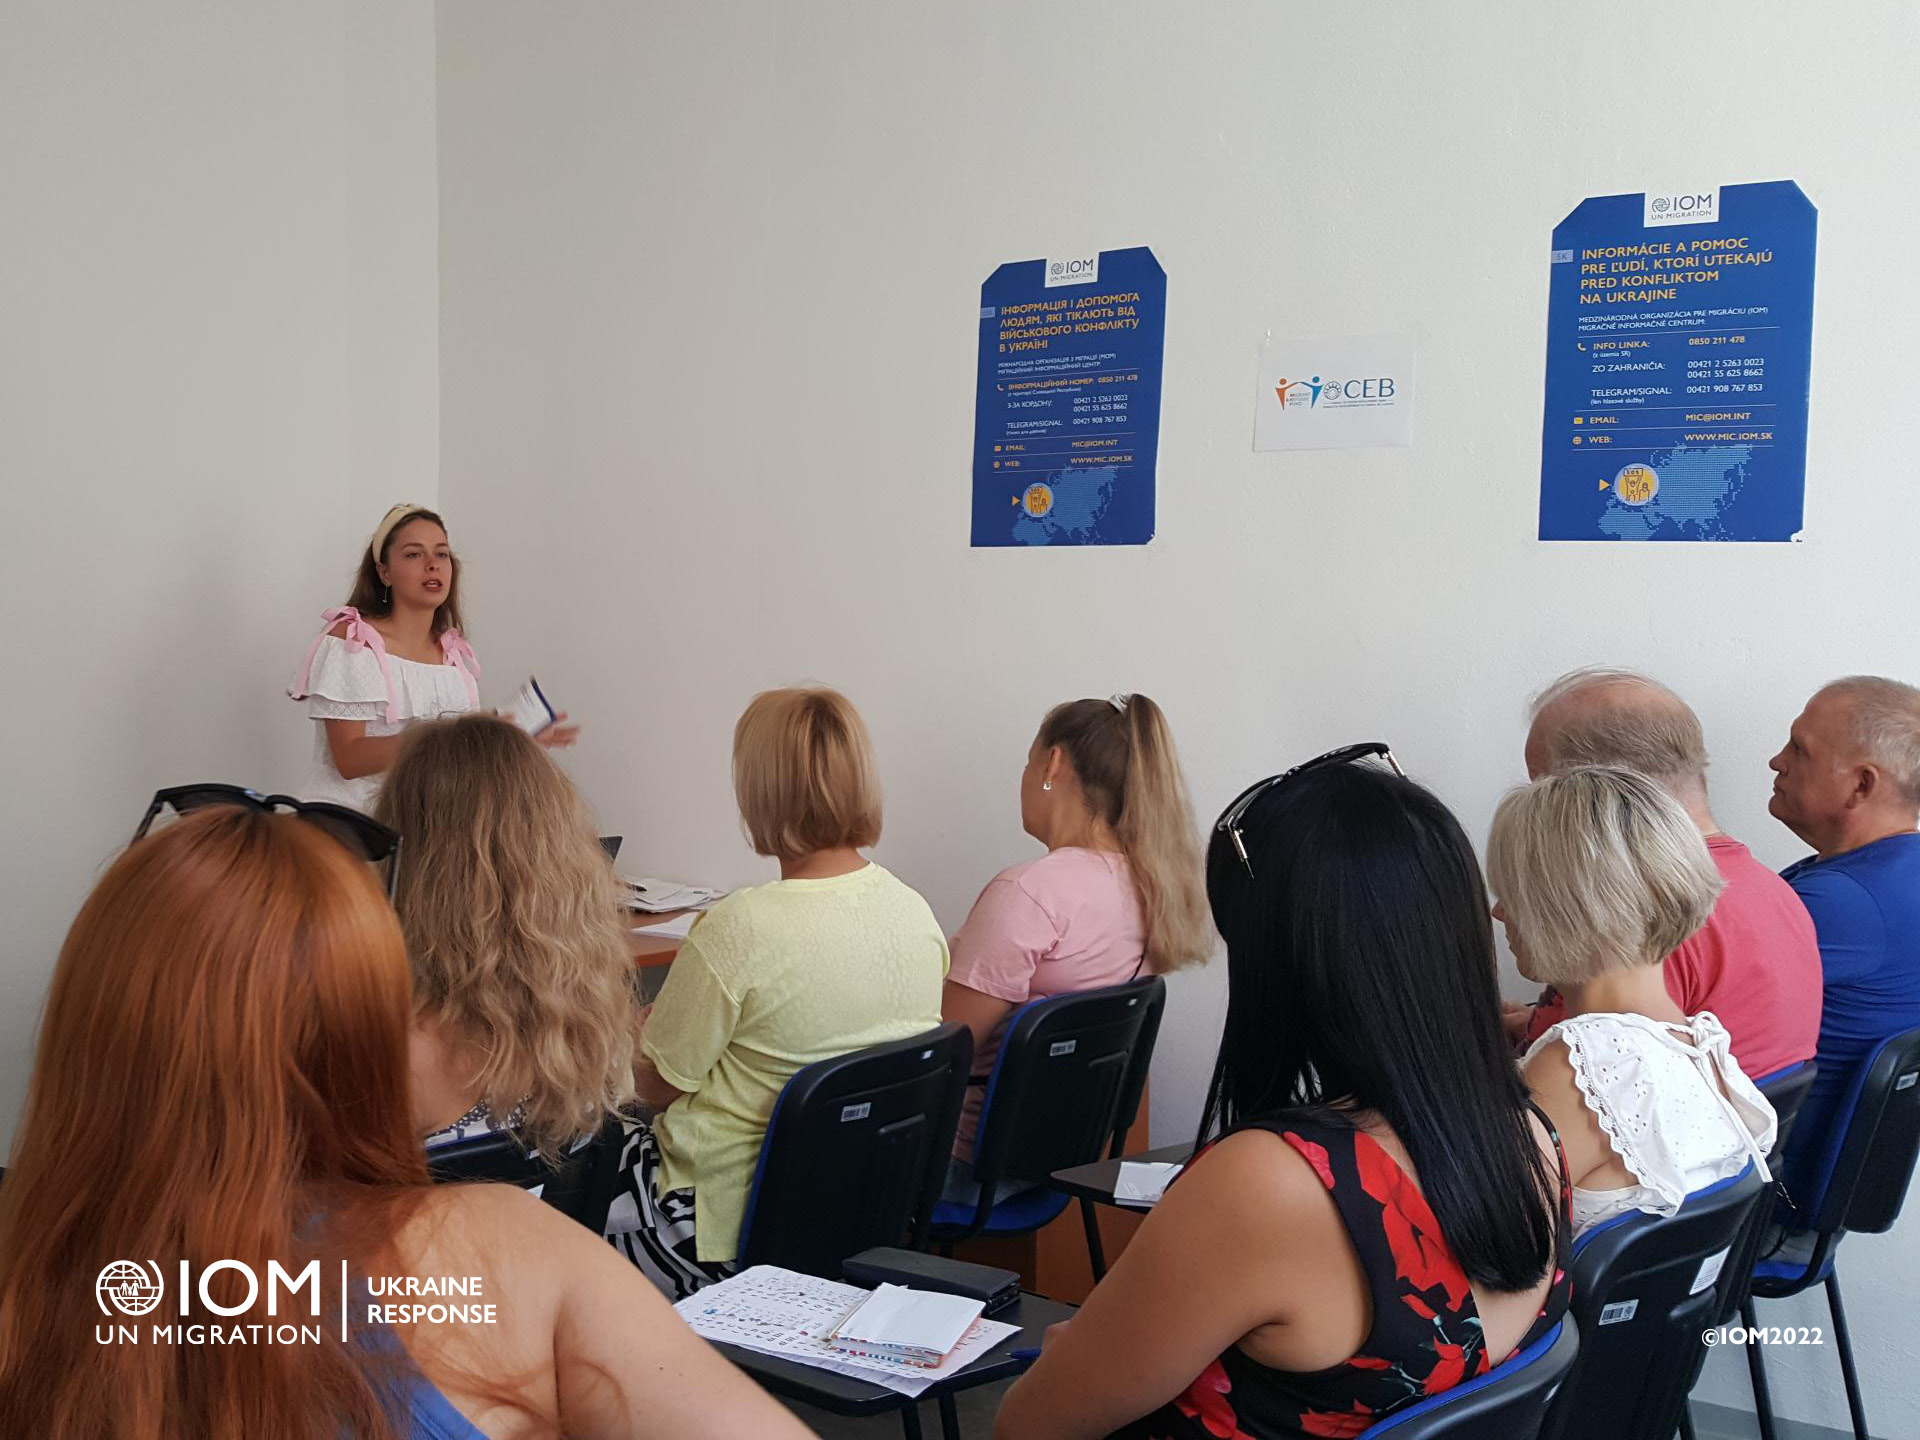 IOM course of Slovak language for people from Ukraine in Kosice. Photo © International Organization for Migration (IOM) 2022.